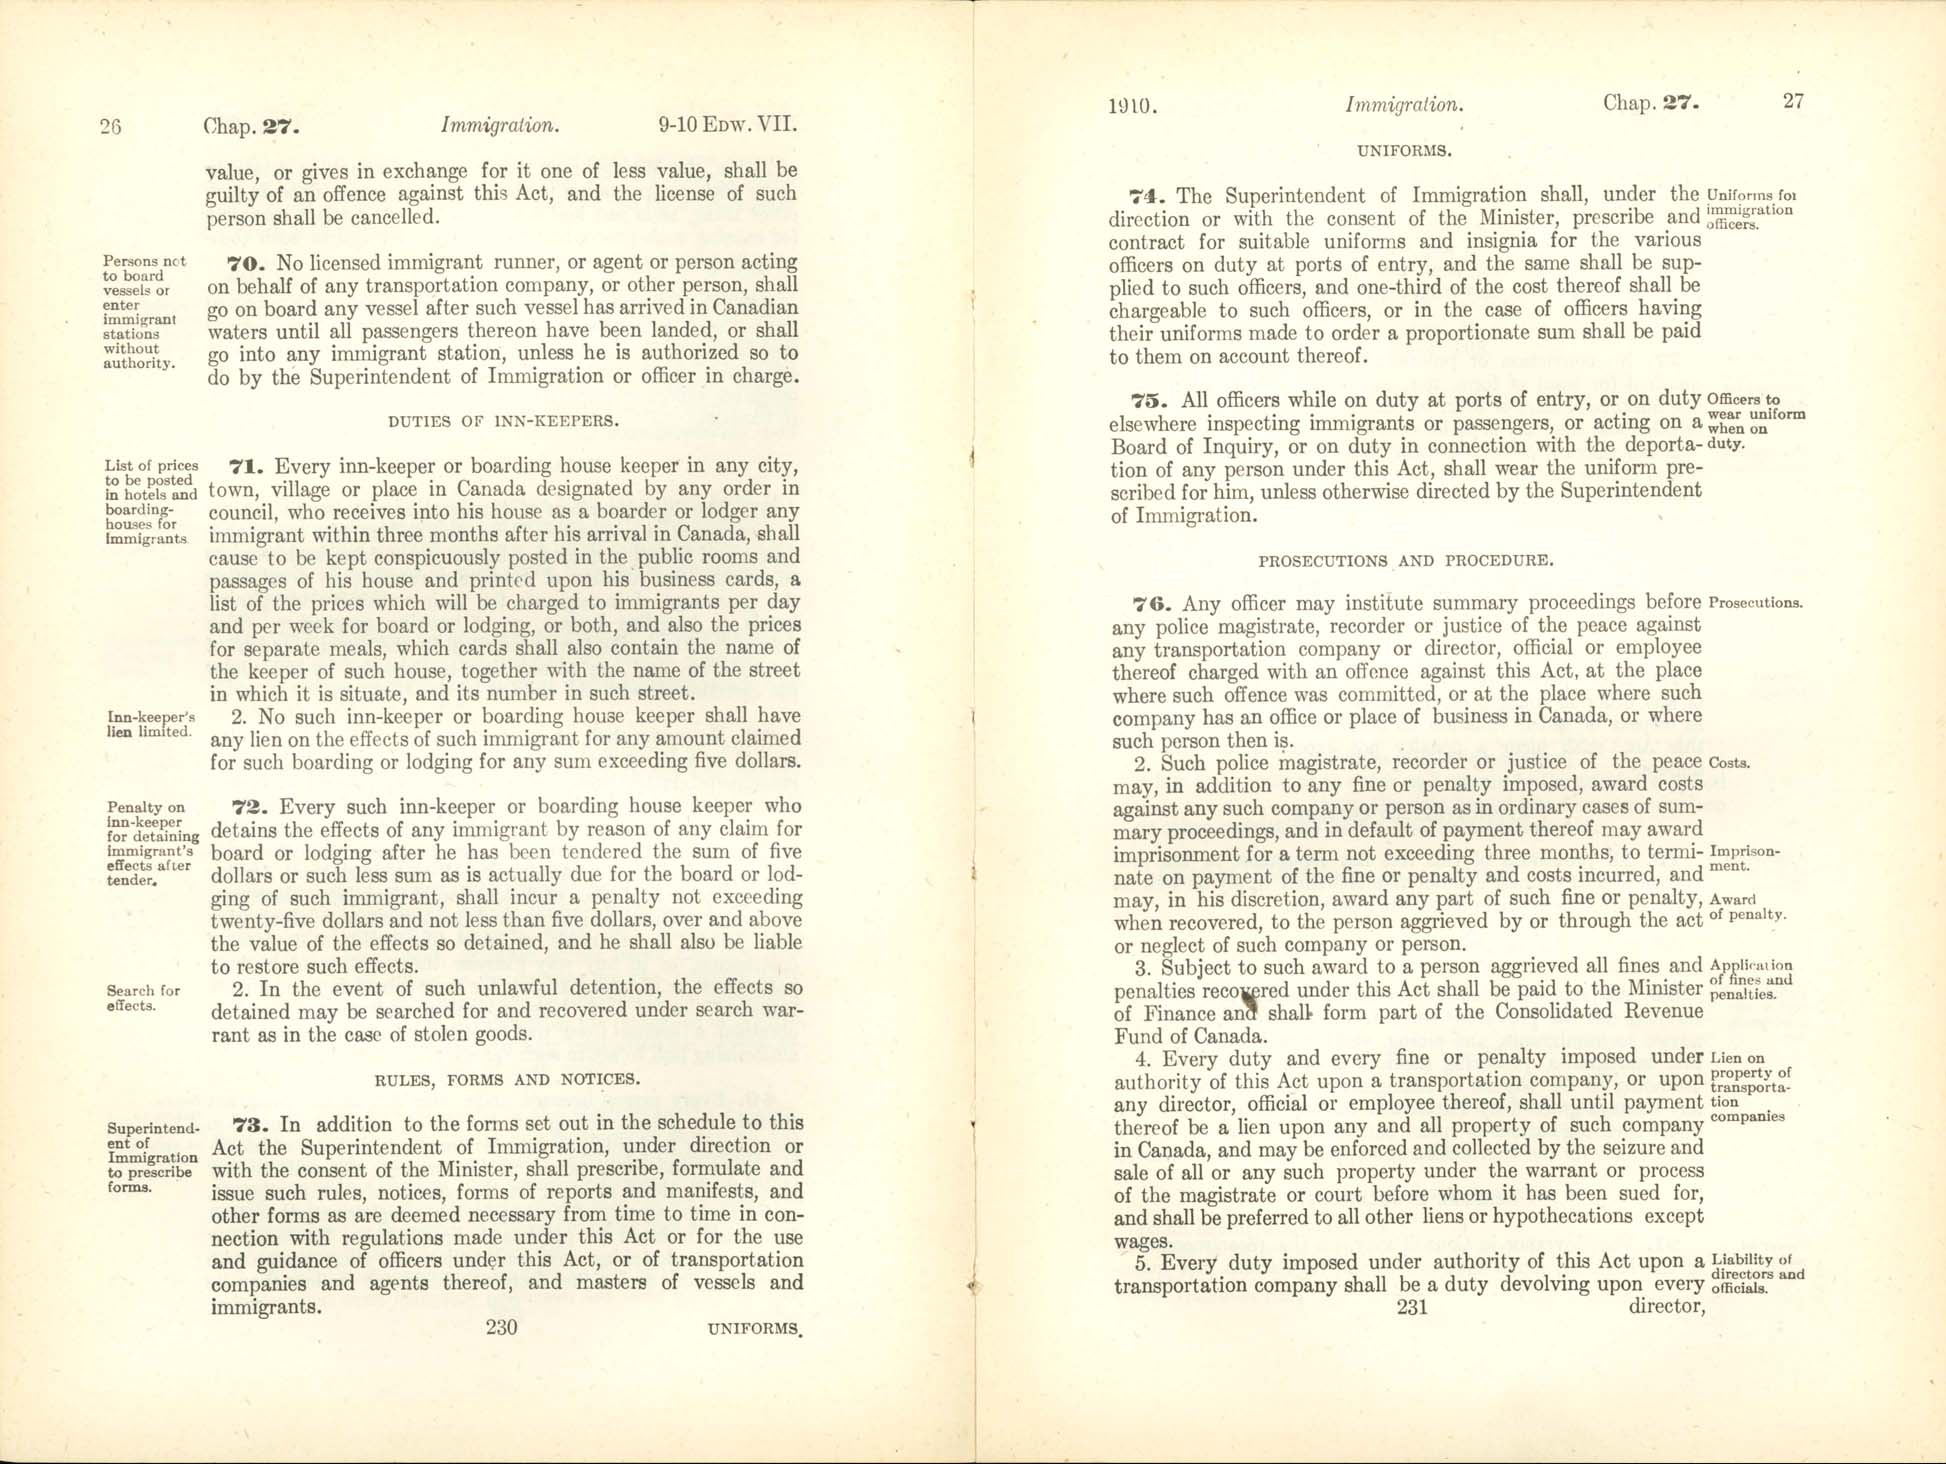 Chap. 27 Page 230, 231 Immigration Act, 1910